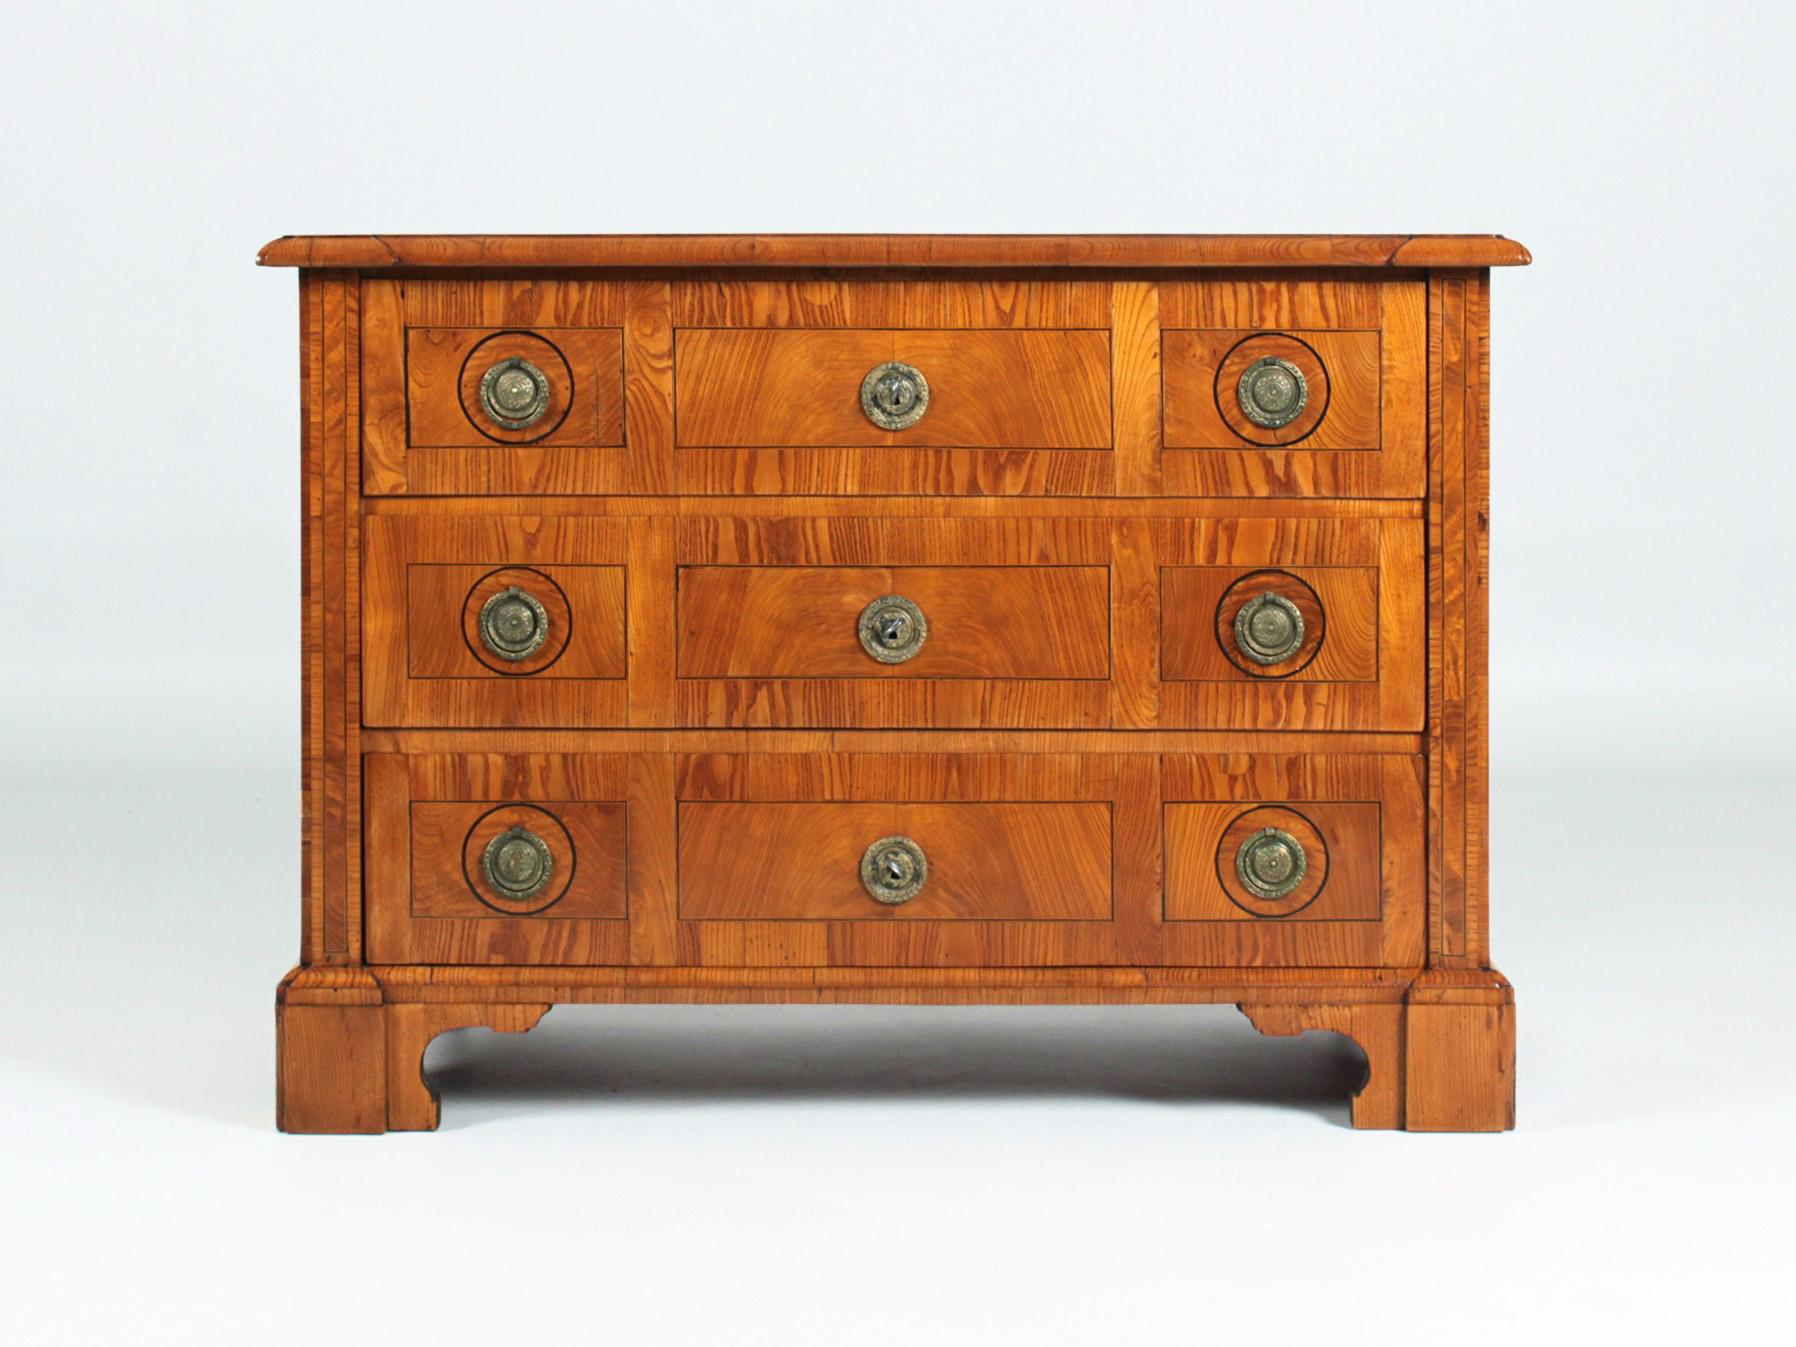 Classicist chest of drawers

Brunswick
Ash tree
Louis XVI circa 1800

Dimensions: H x W x D: 80 x 113 x 56 cm

Description:
North German Louis XVI chest of drawers with light-coloured base wood and dark contrasting inlays.

Three-tier piece of